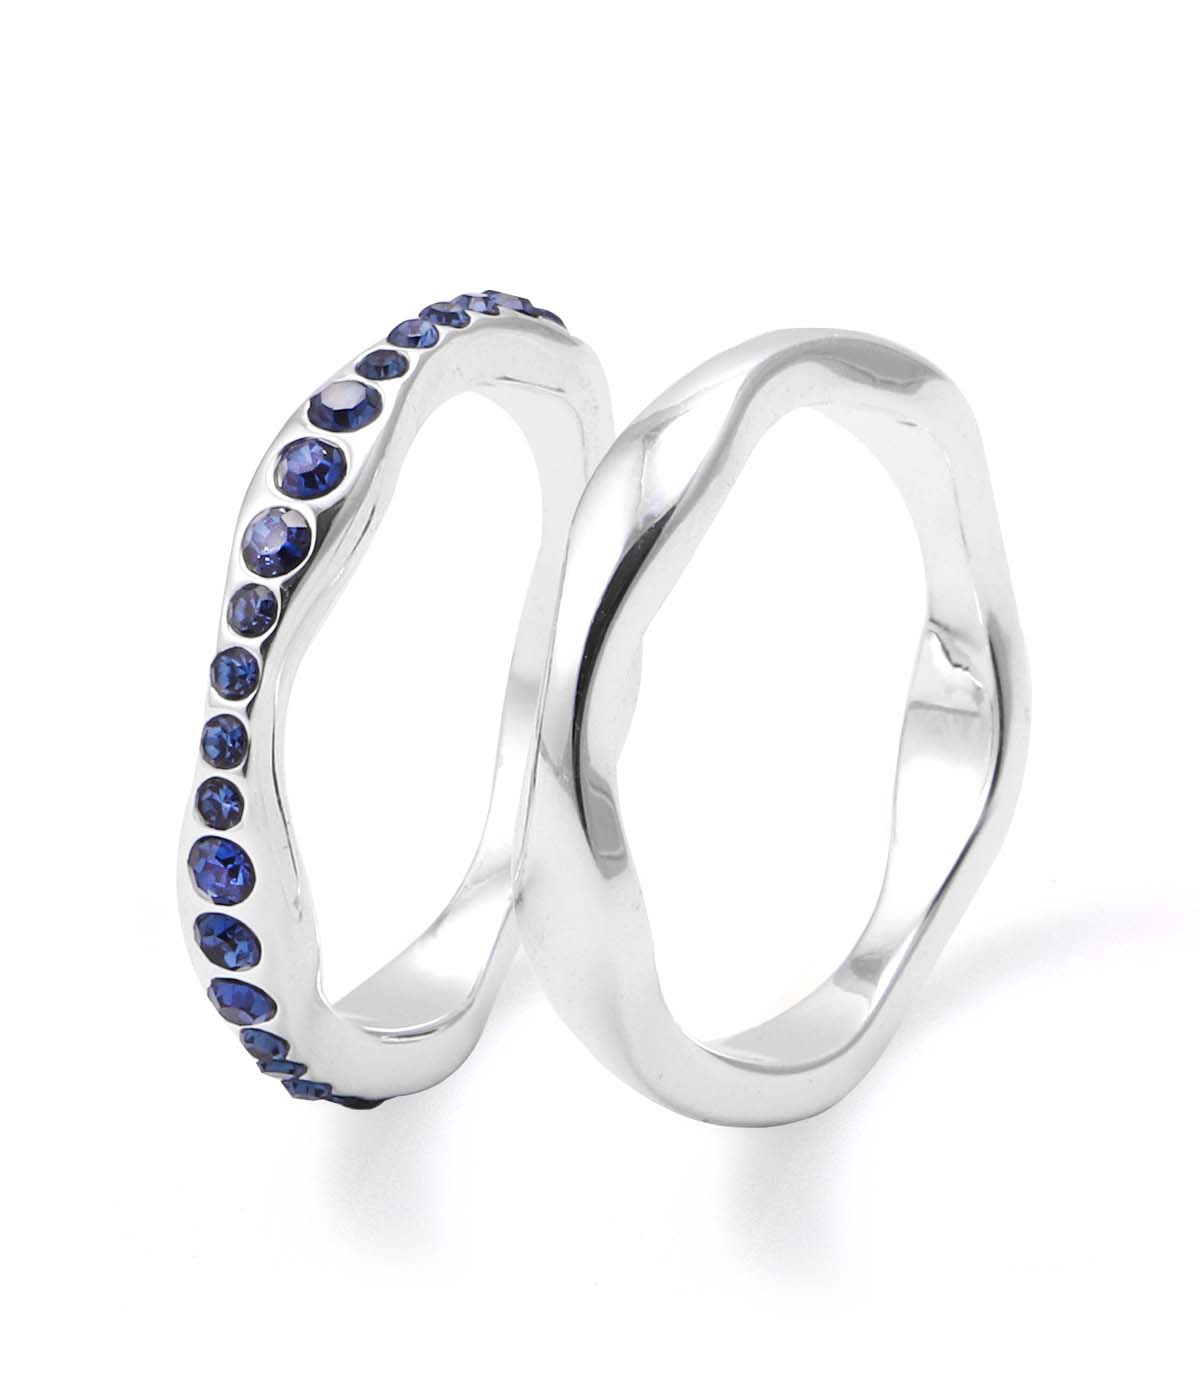 FLOW-Blue-New mould -latest RING,Band Ring design 2021